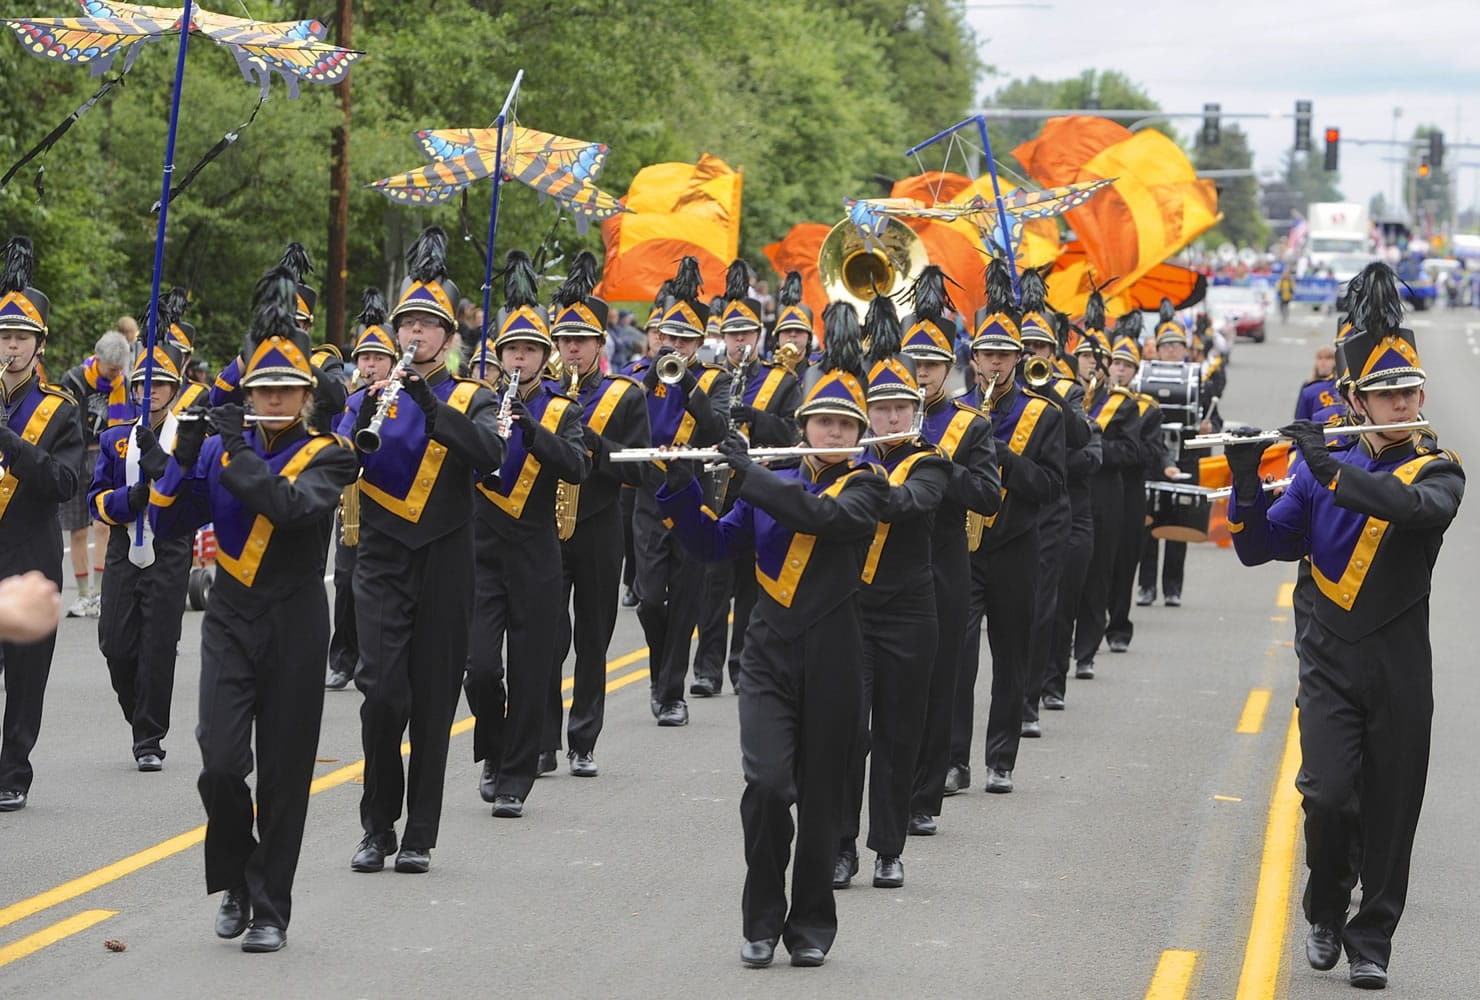 Parade of Bands Photo Gallery The Columbian